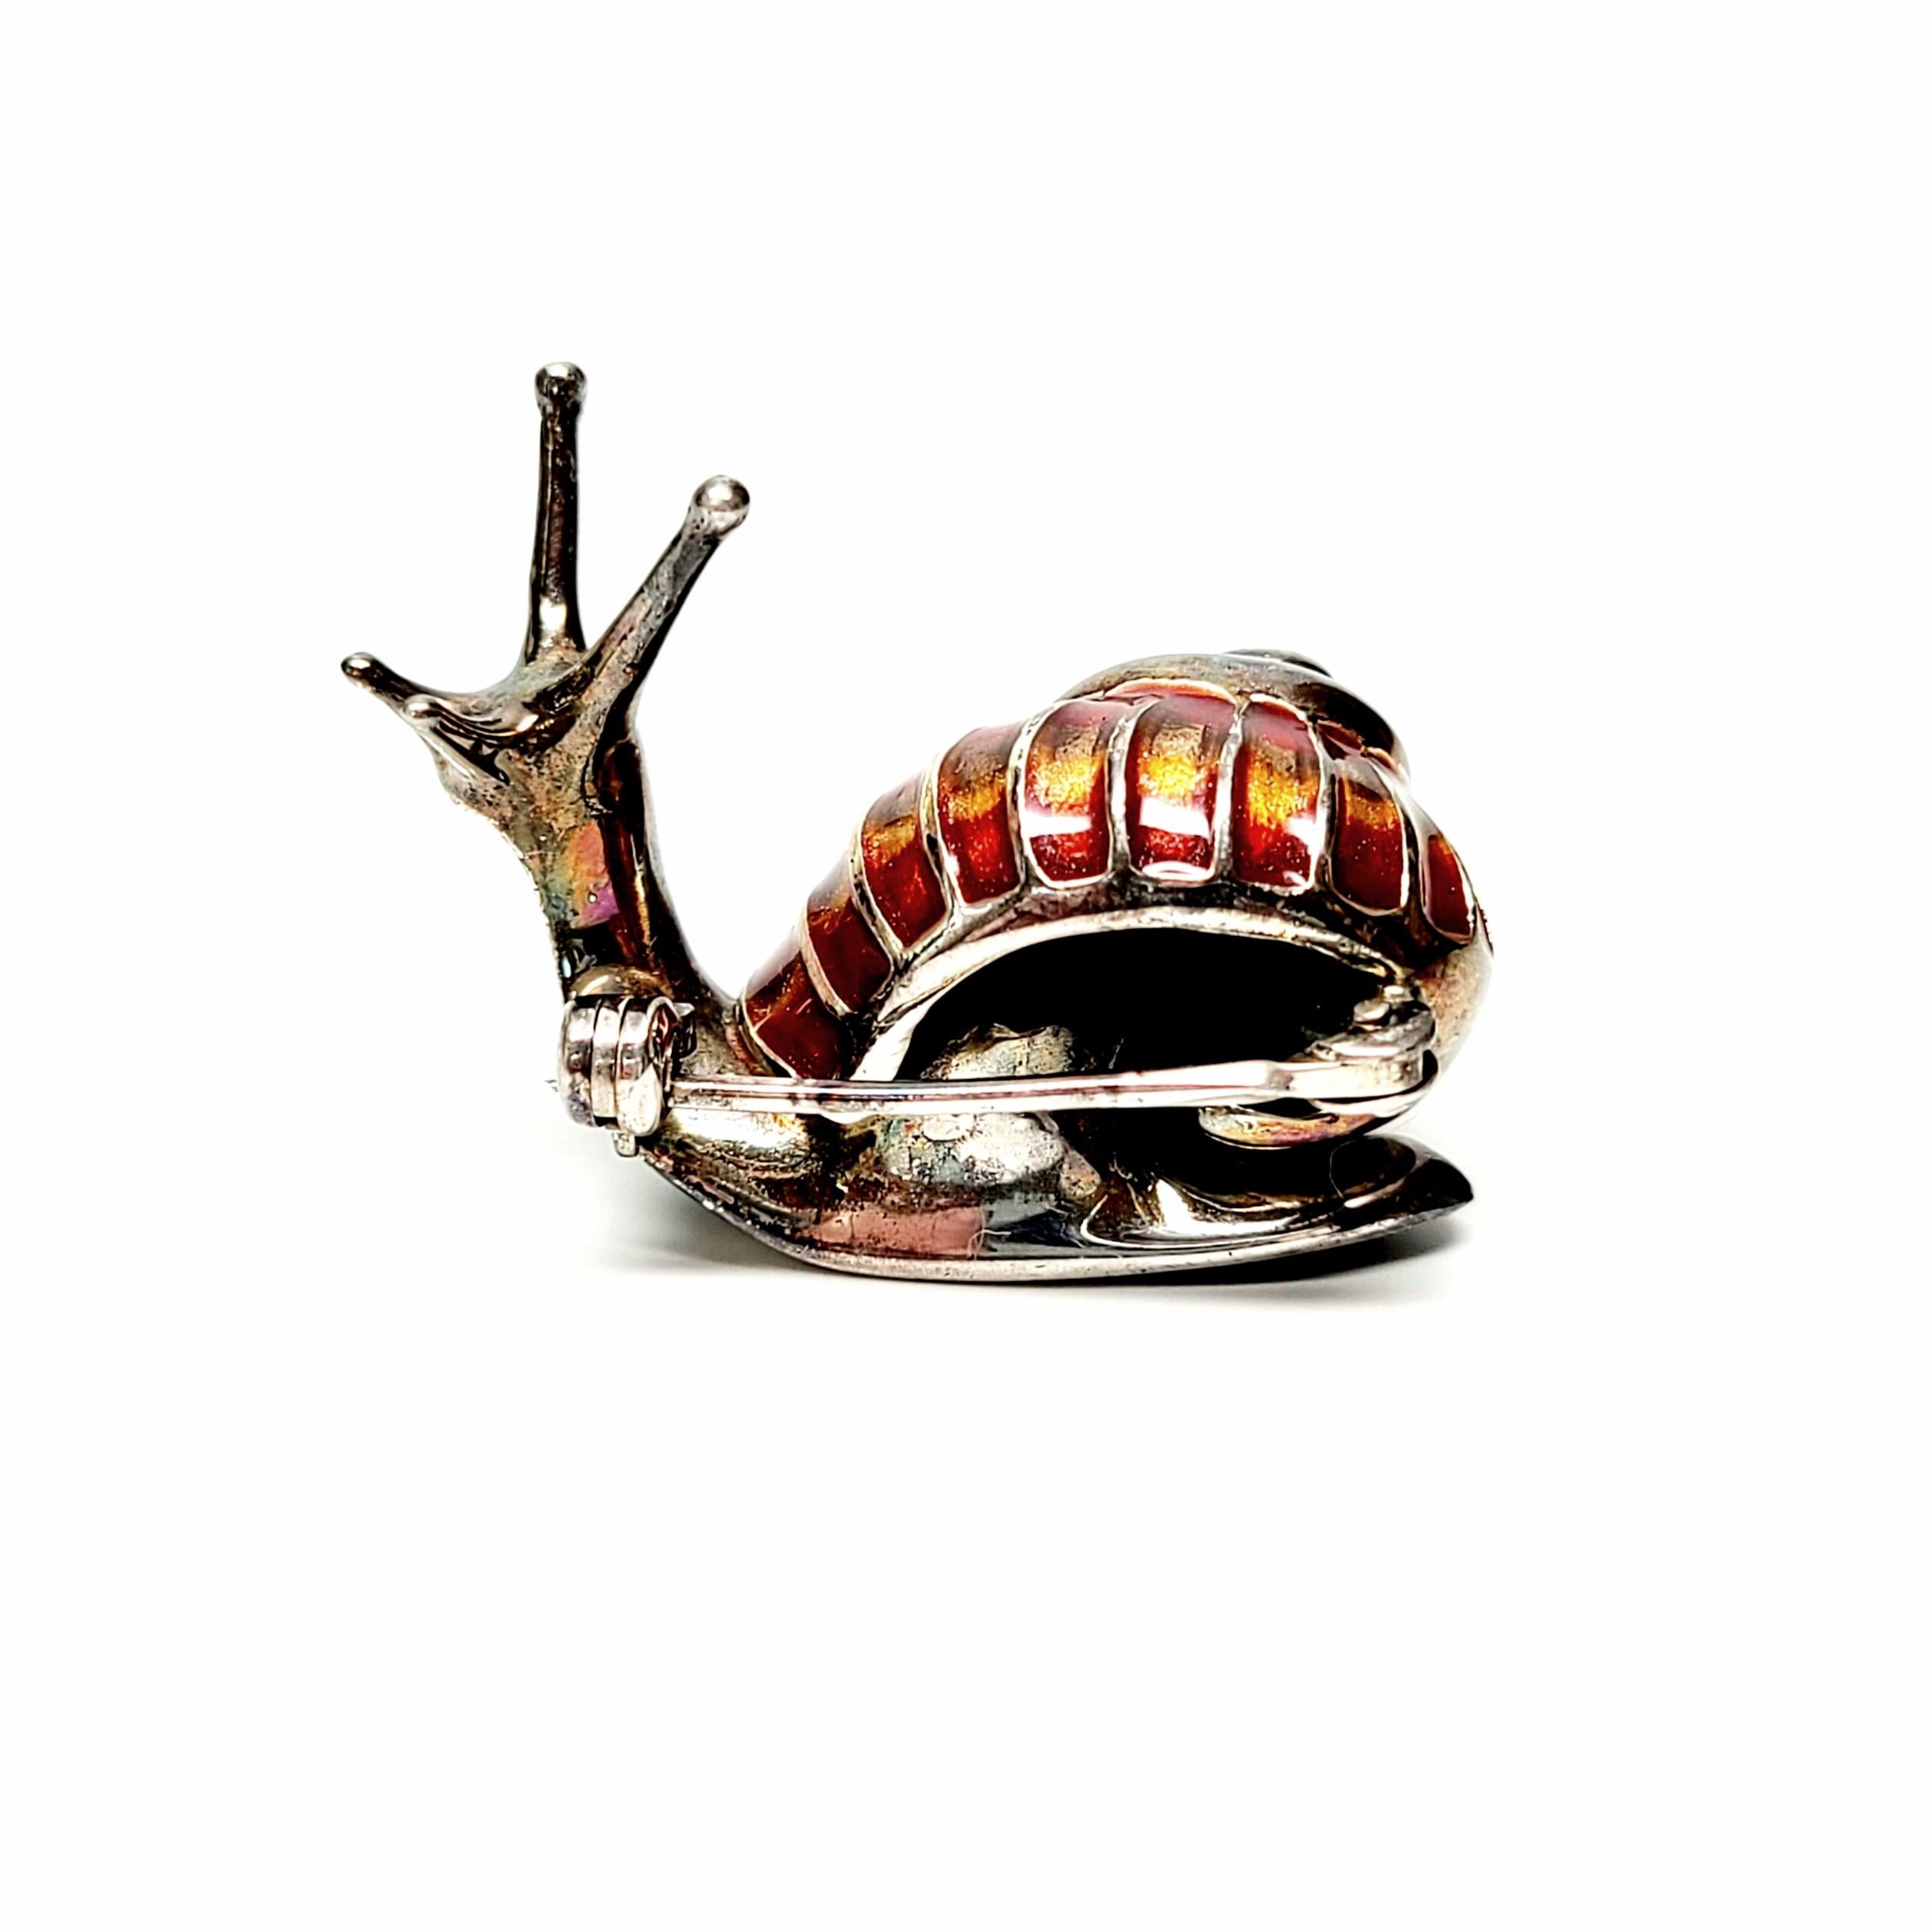 Vintage Italian sterling silver and enamel snail pin.

Beautifully hand enameled, featuring red, yellow and a hint of green enamel on a swirl shell.

Measures approx 7/8